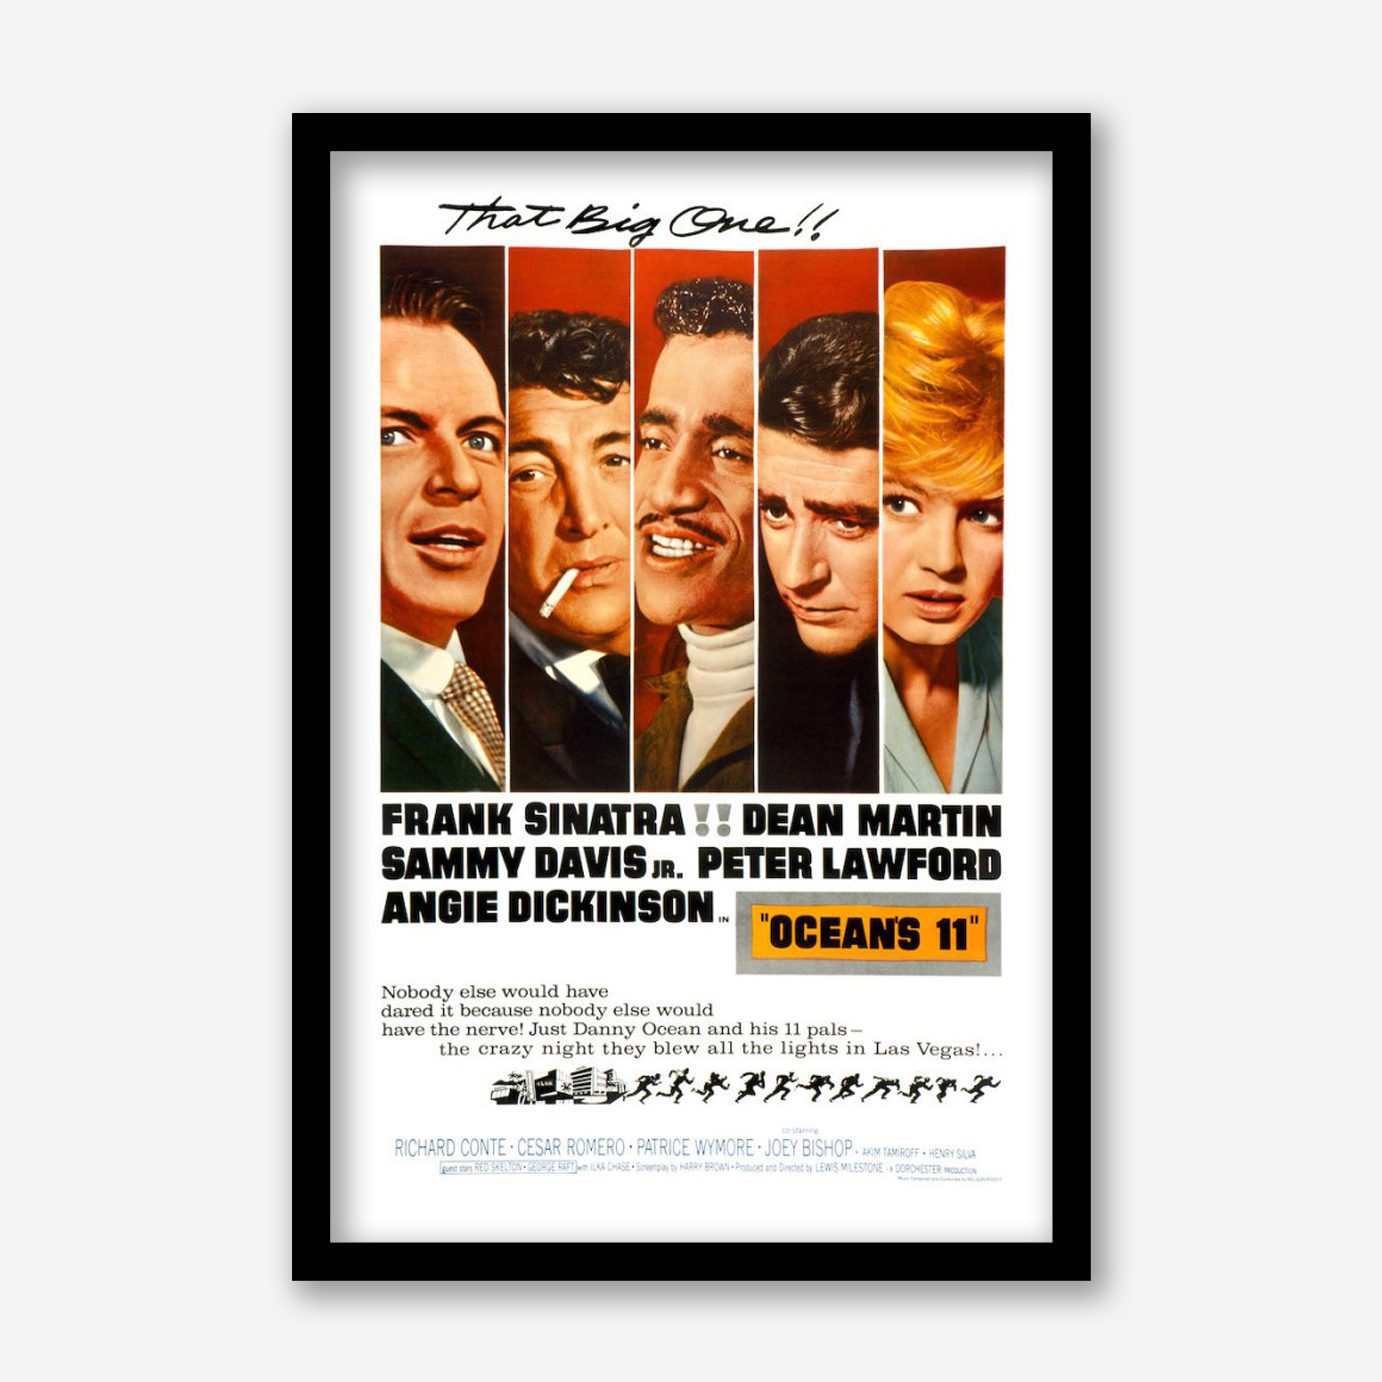 The finest vintage film posters to hang in your home